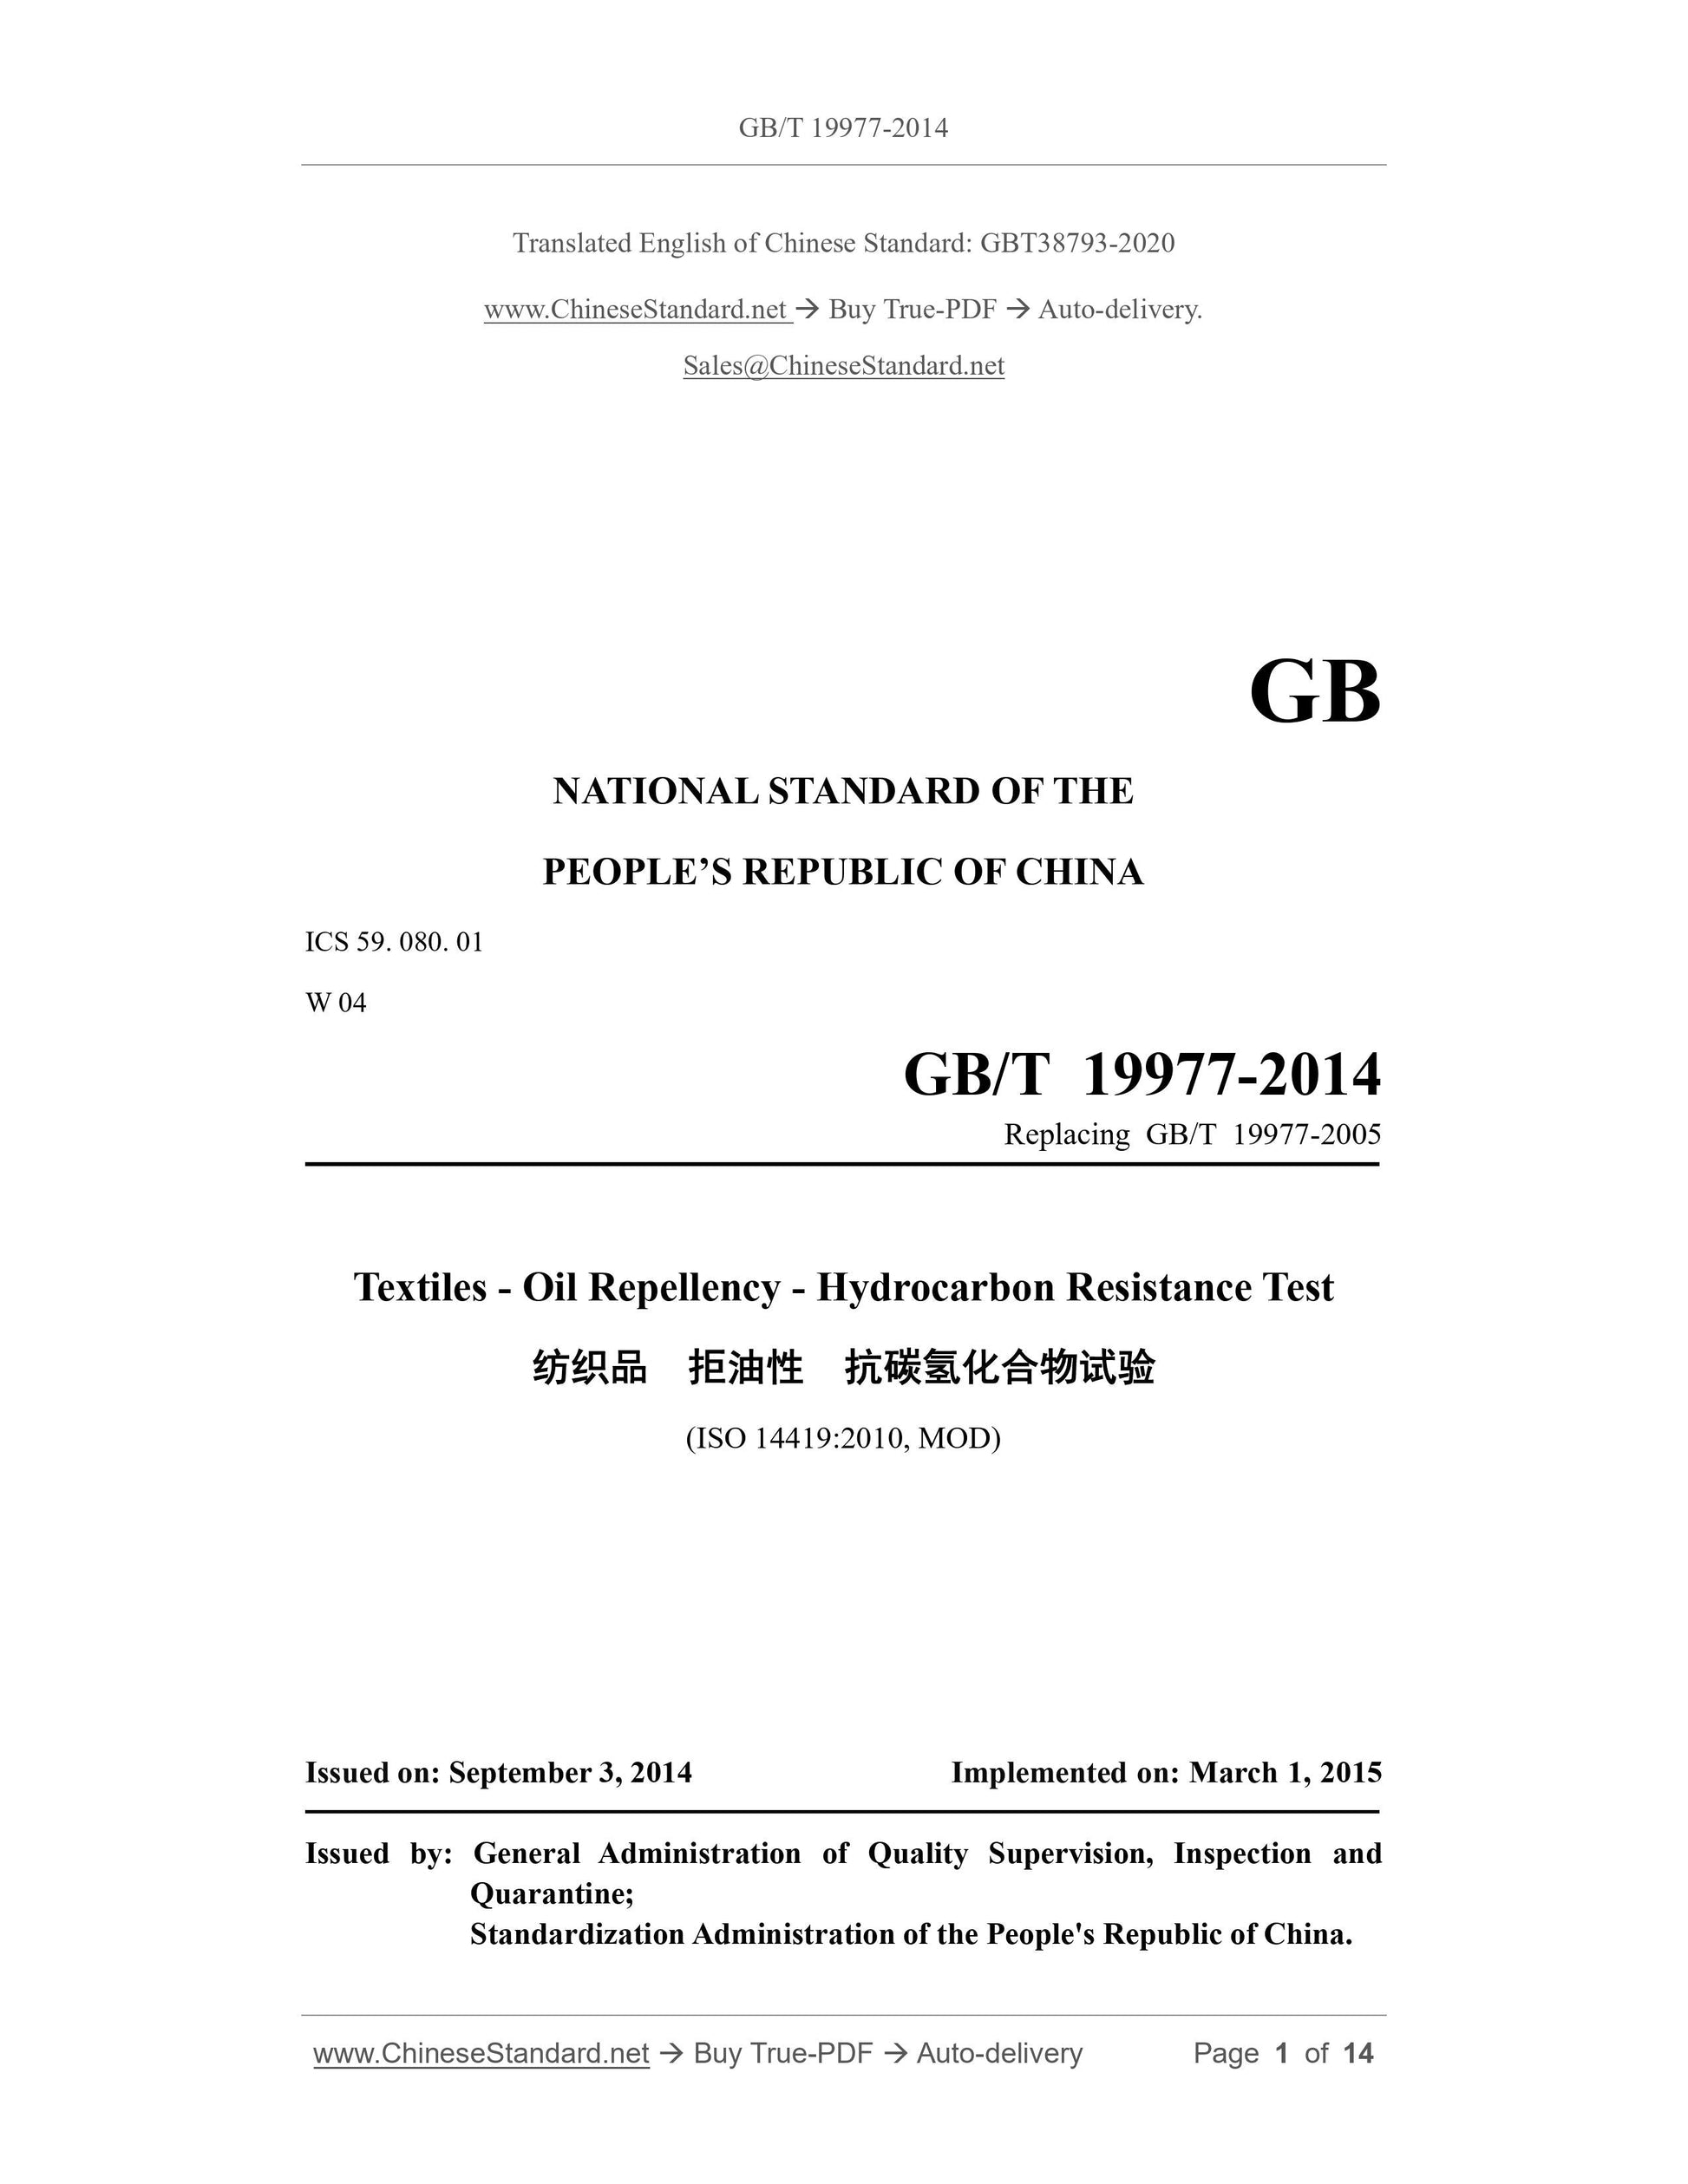 GB/T 19977-2014 Page 1